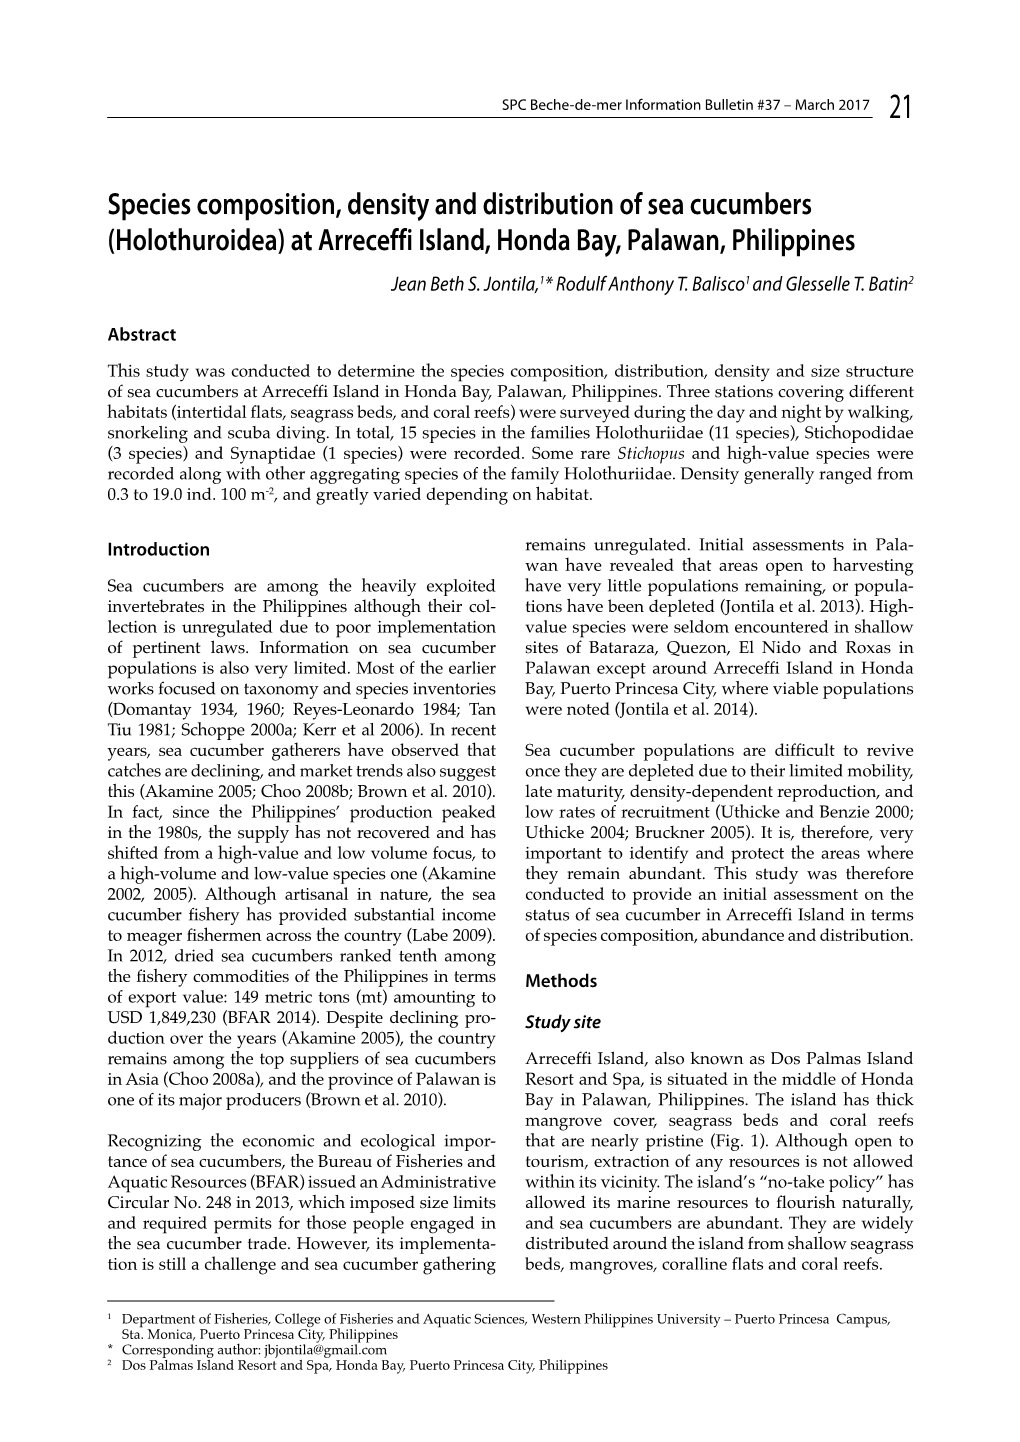 Species Composition, Density and Distribution of Sea Cucumbers (Holothuroidea) at Arreceffi Island, Honda Bay, Palawan, Philippines Jean Beth S